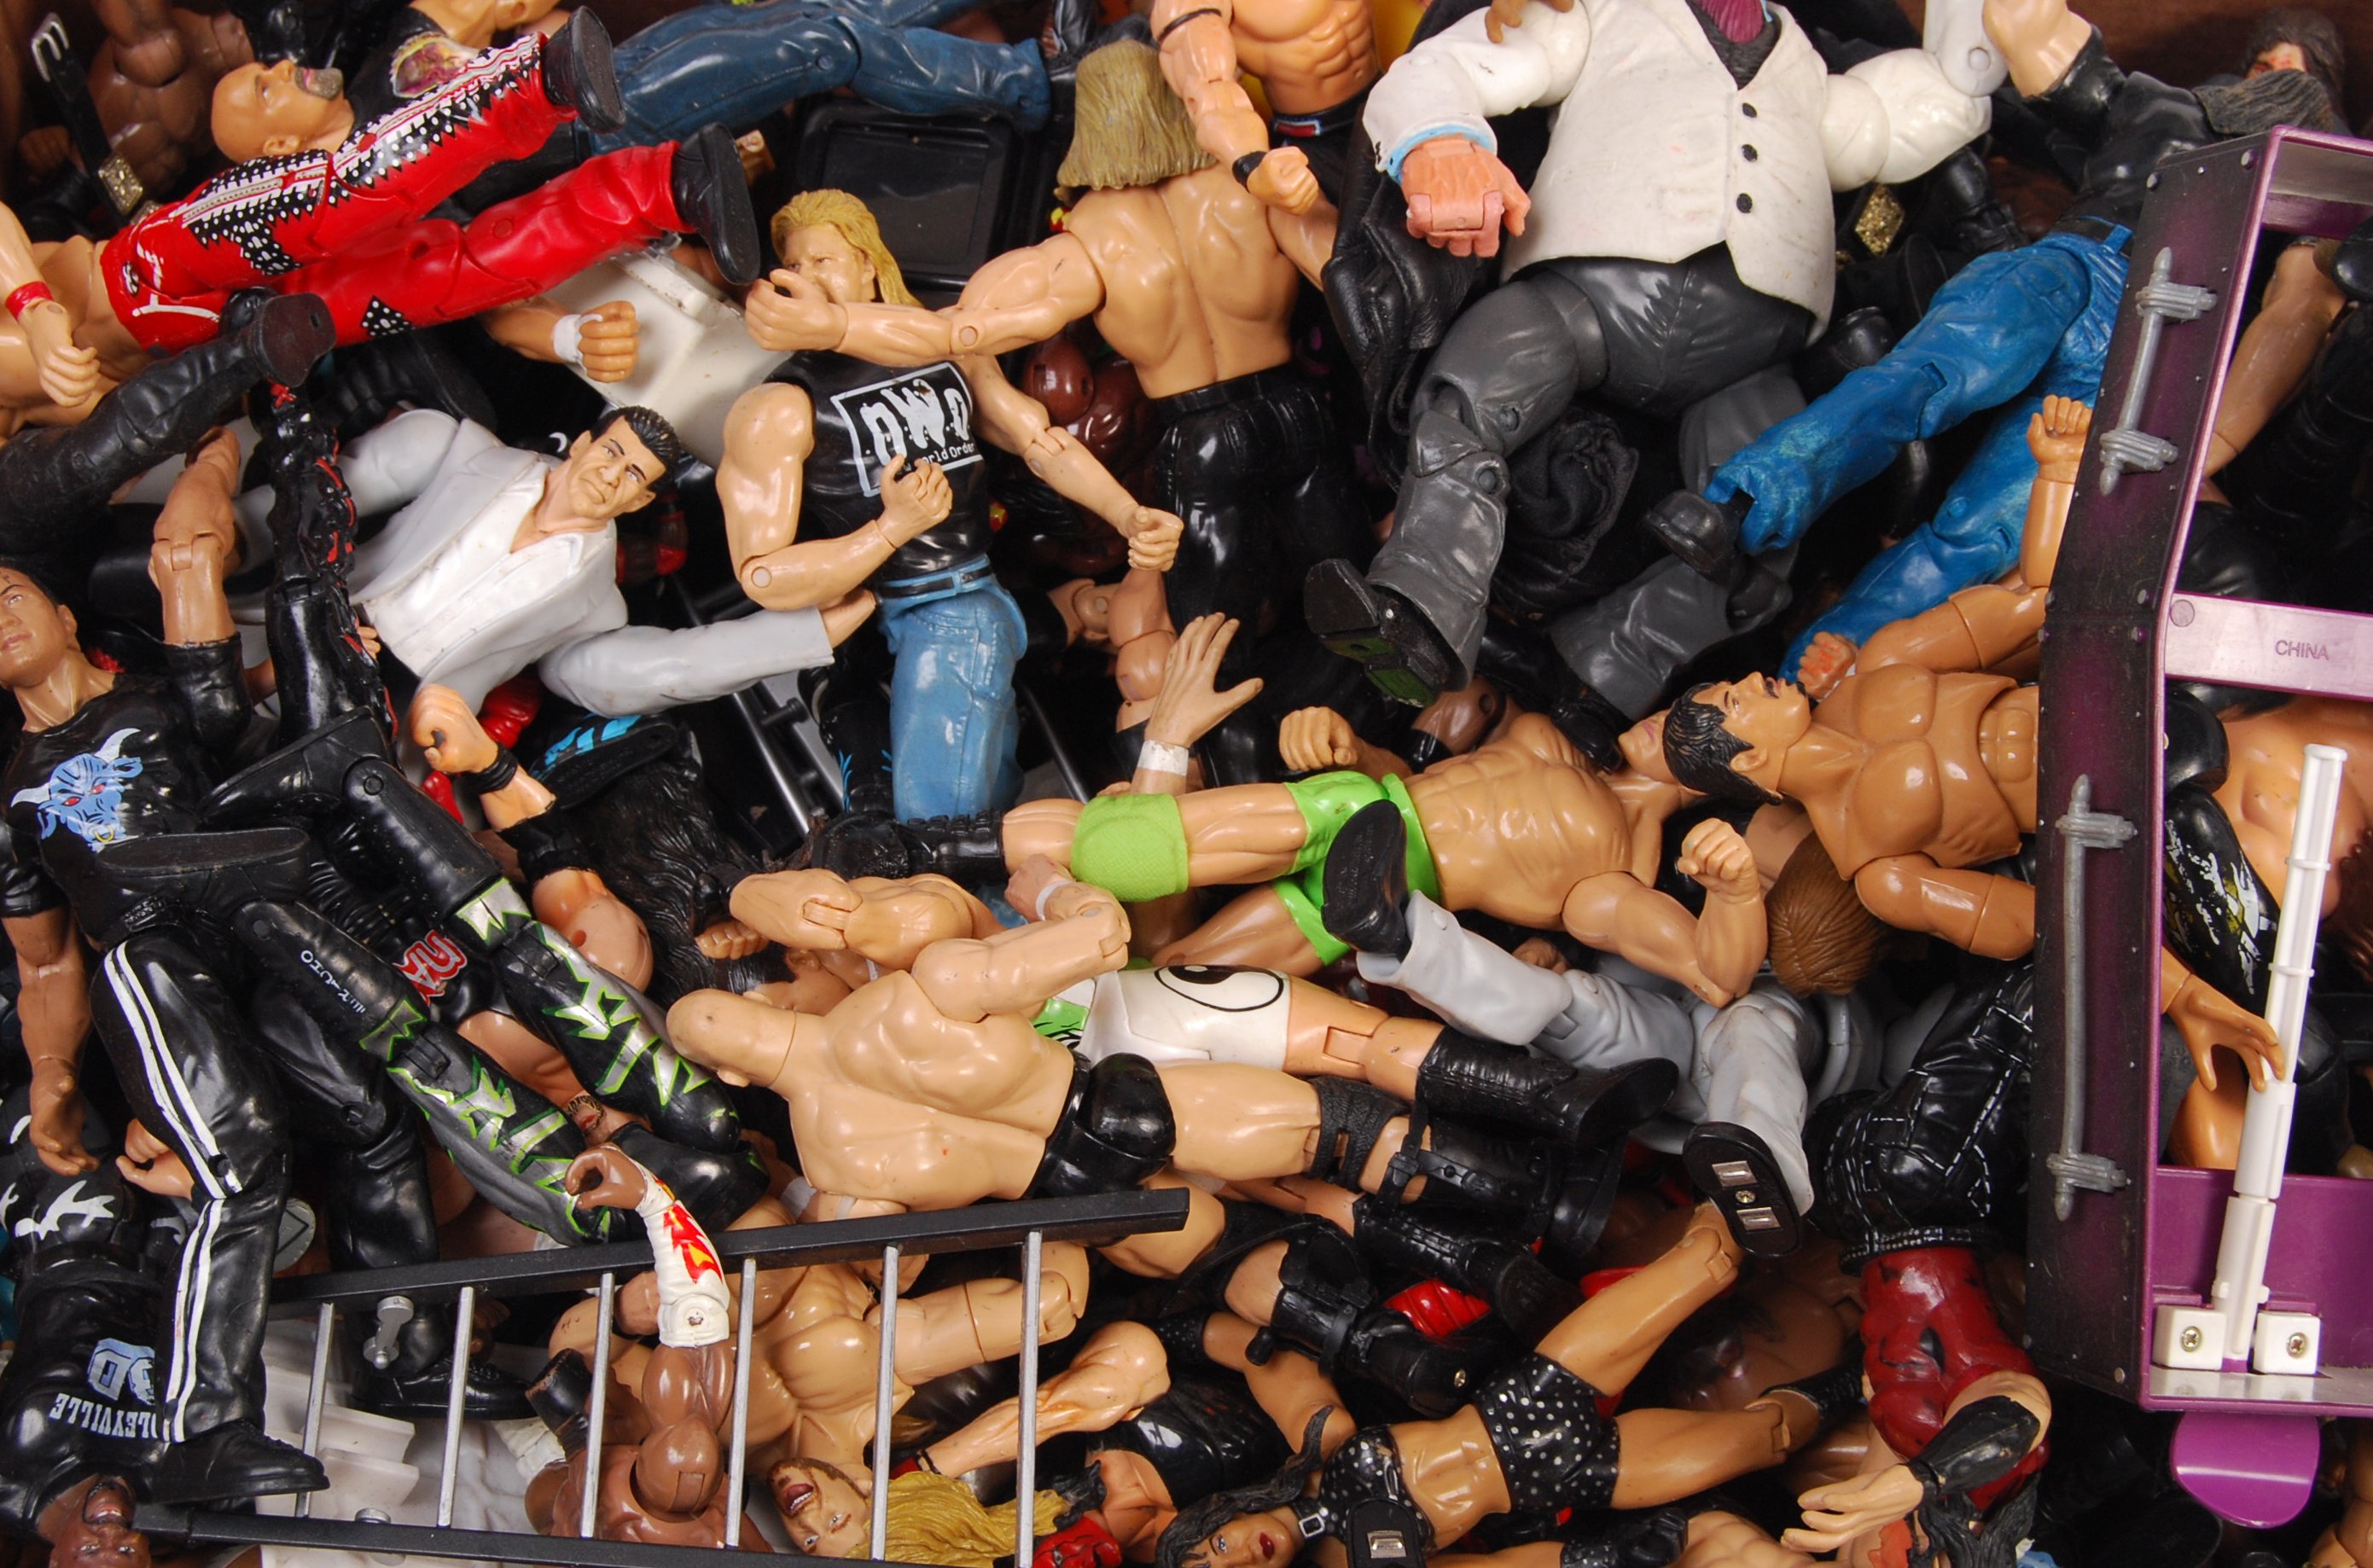 LARGE COLLECTIONS OF JAKKS PACIFIC WWE WRESTING ACTION FIGURES - Image 2 of 4